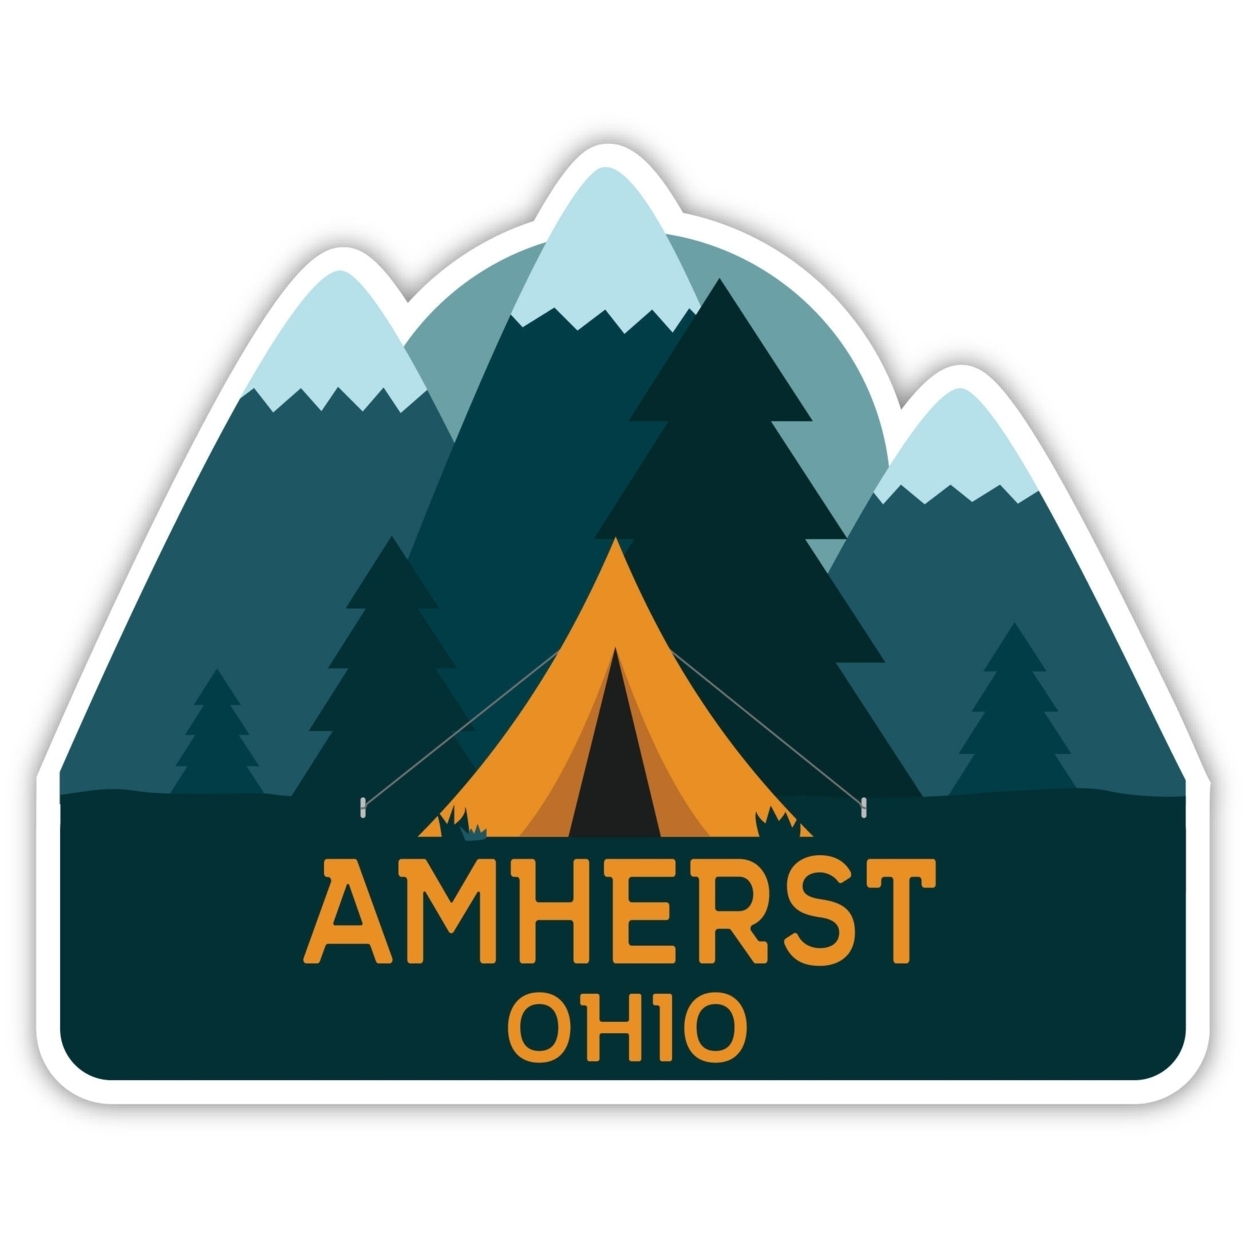 Amherst Ohio Souvenir Decorative Stickers (Choose Theme And Size) - 4-Pack, 8-Inch, Tent